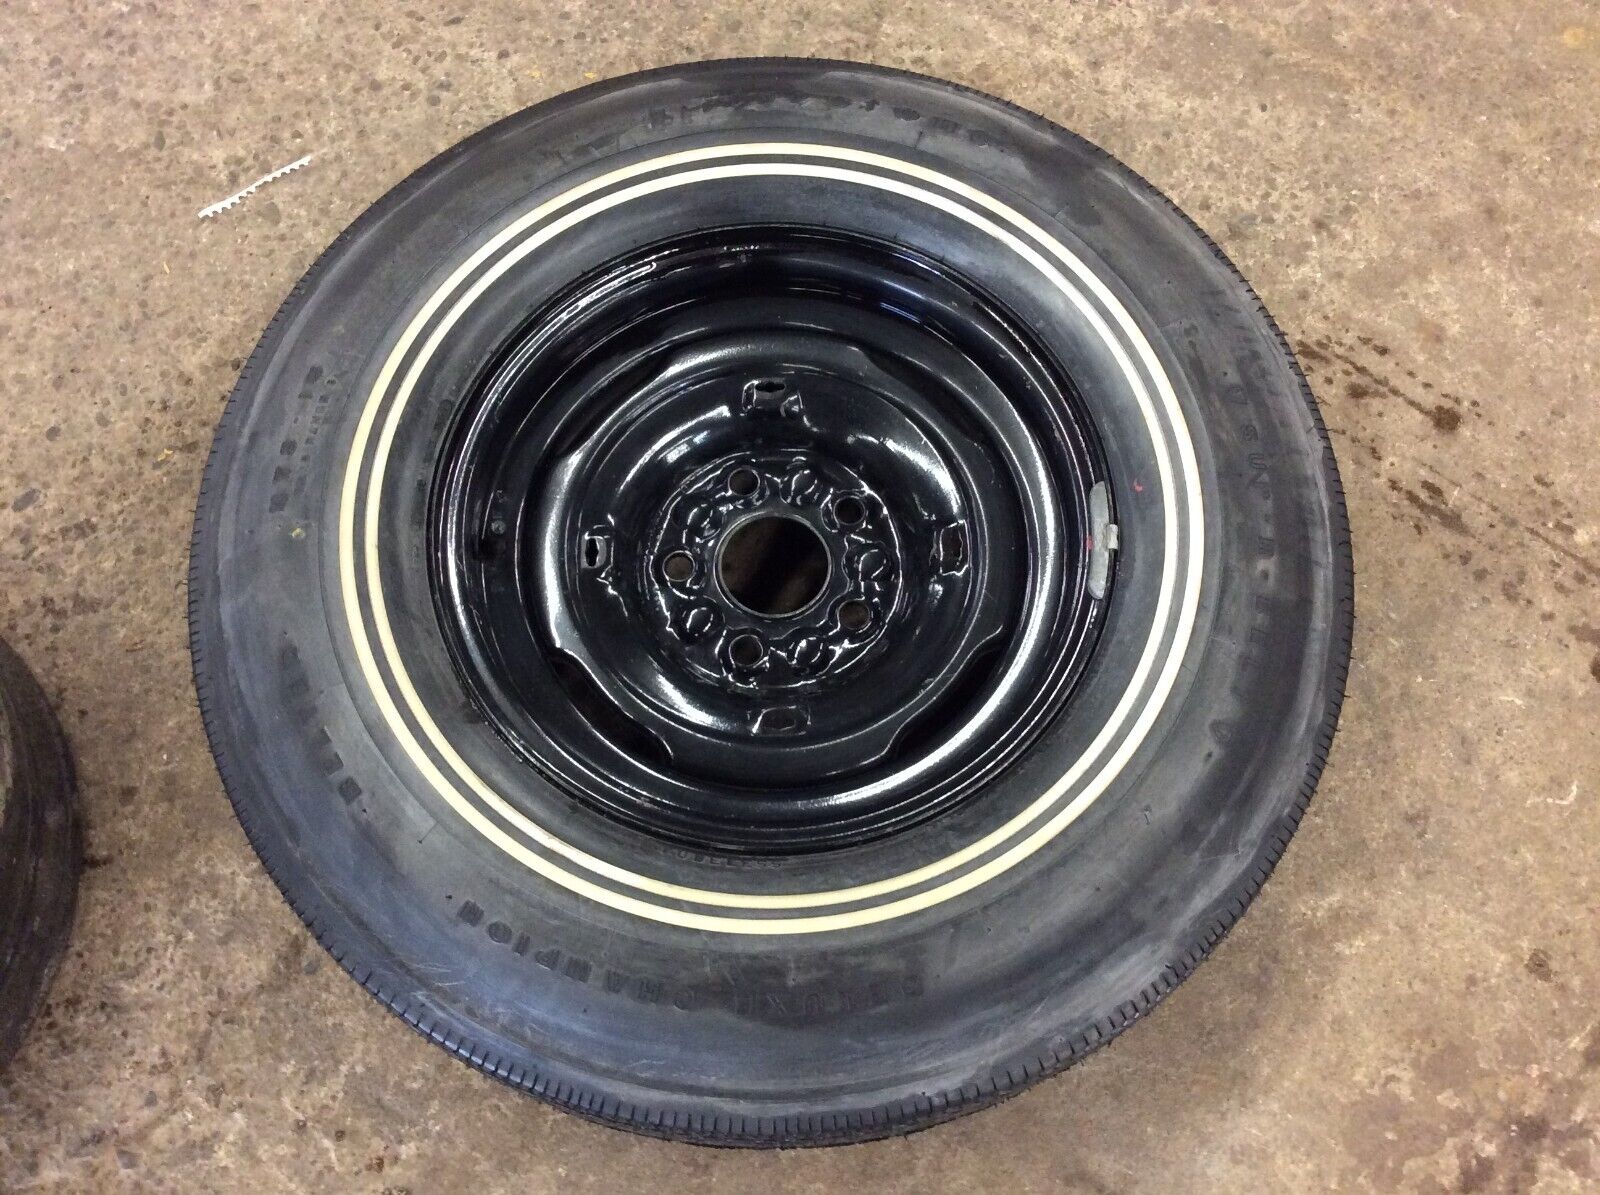 NOS 1970 70 Buick Wildcat Electra Spare Tire & Wheel Firestone Never Driven On